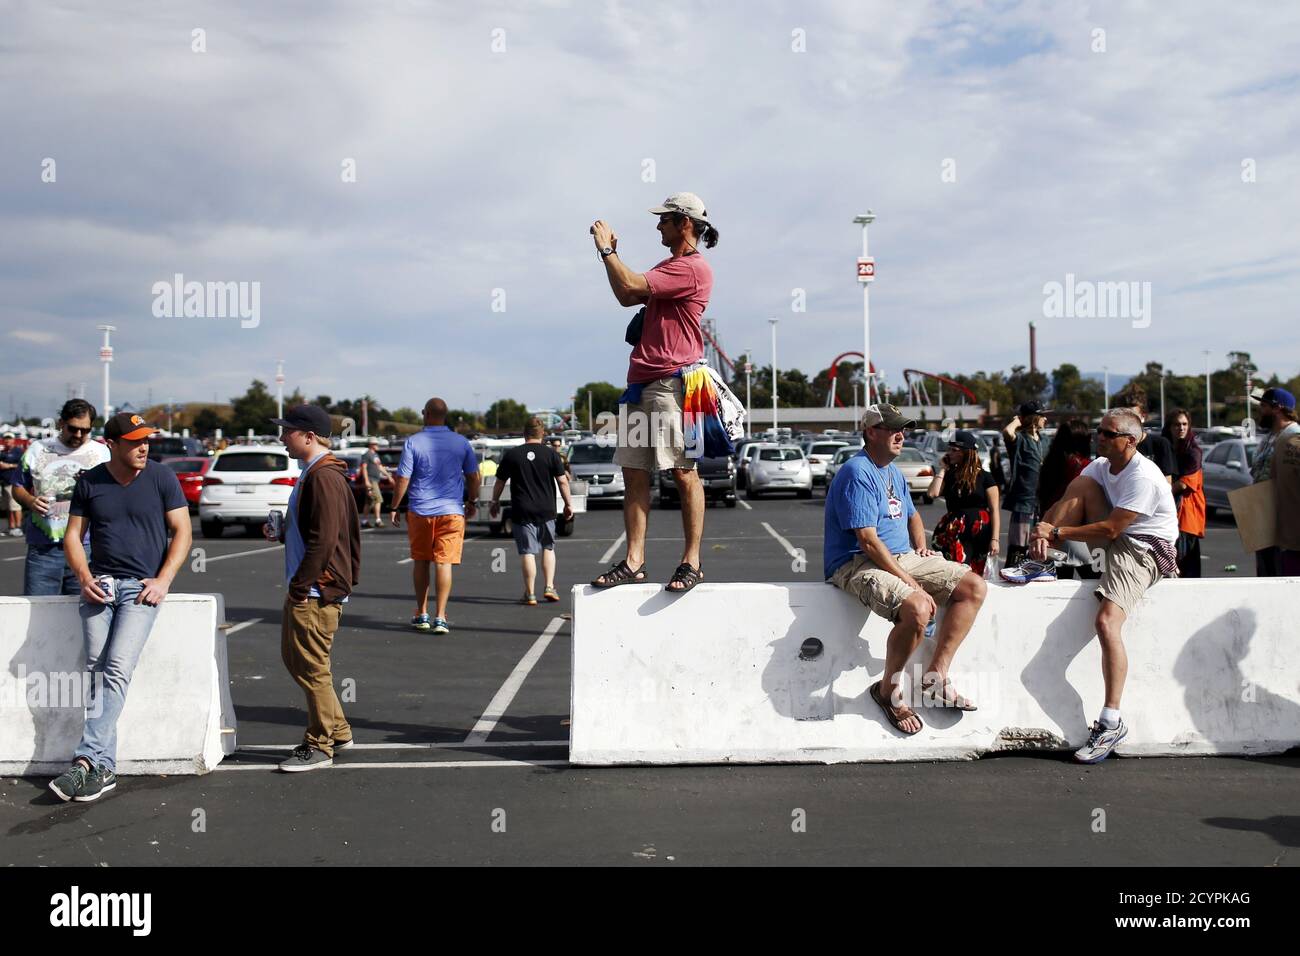 Grateful Dead fans gather outside Levi's Stadium before Grateful Dead's 'Fare Thee Well: Celebrating 50 Years of Grateful Dead' farewell tour in Santa Clara, California June 27, 2015. REUTERS/Stephen Lam Stock Photo